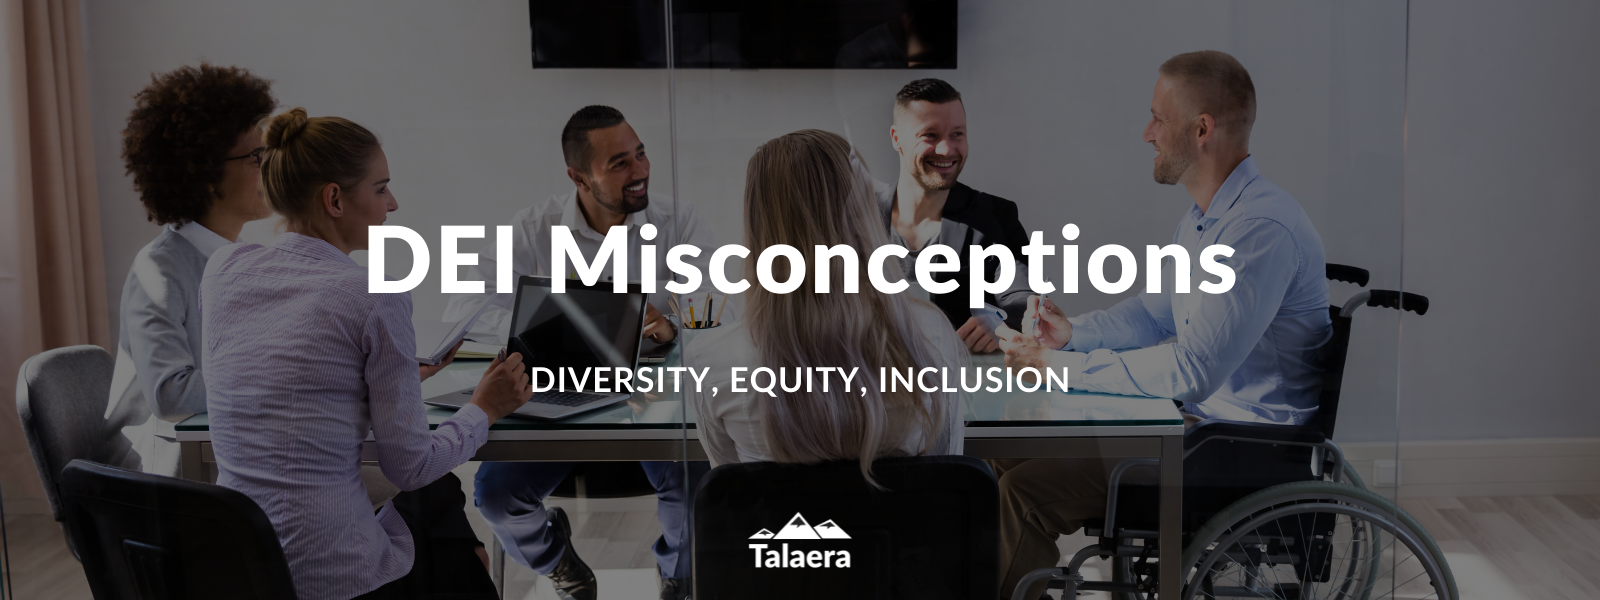 DEI Diversity, Equity, Inclusion - Talaera Business English